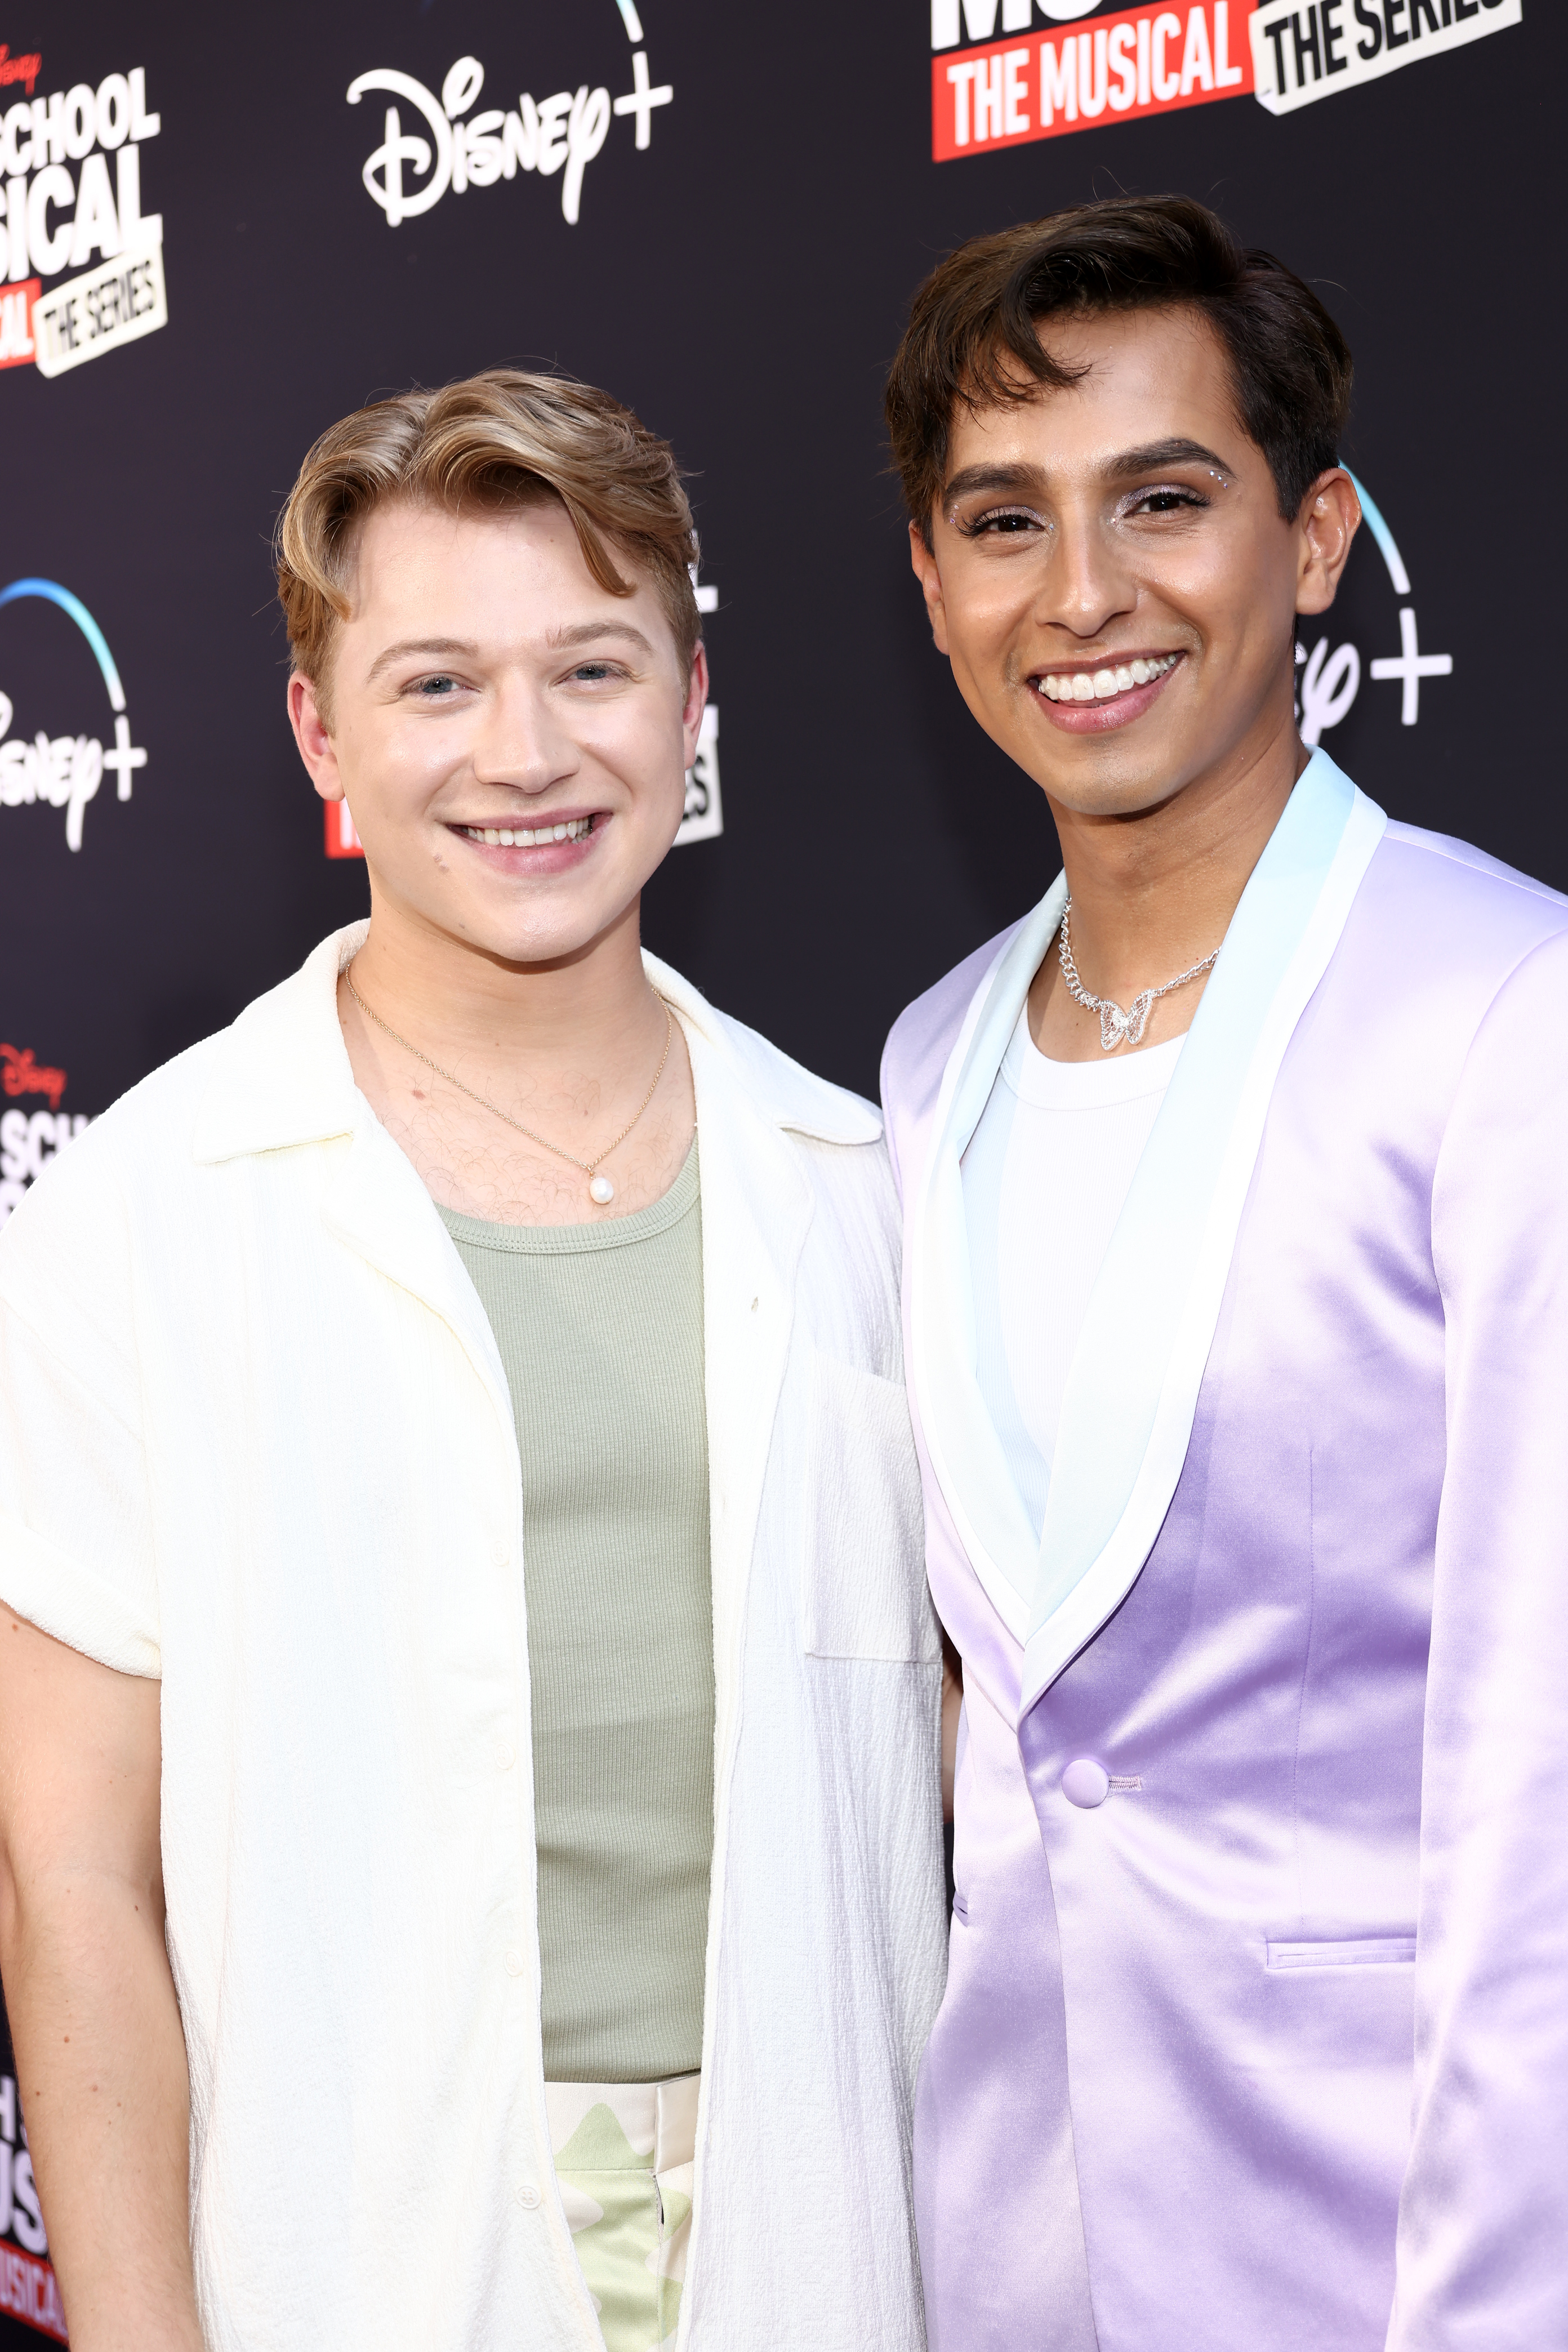 Two actors from &quot;High School Musical: The Musical&quot; smiling at a promotional event. One wears a white outfit, the other a lavender suit